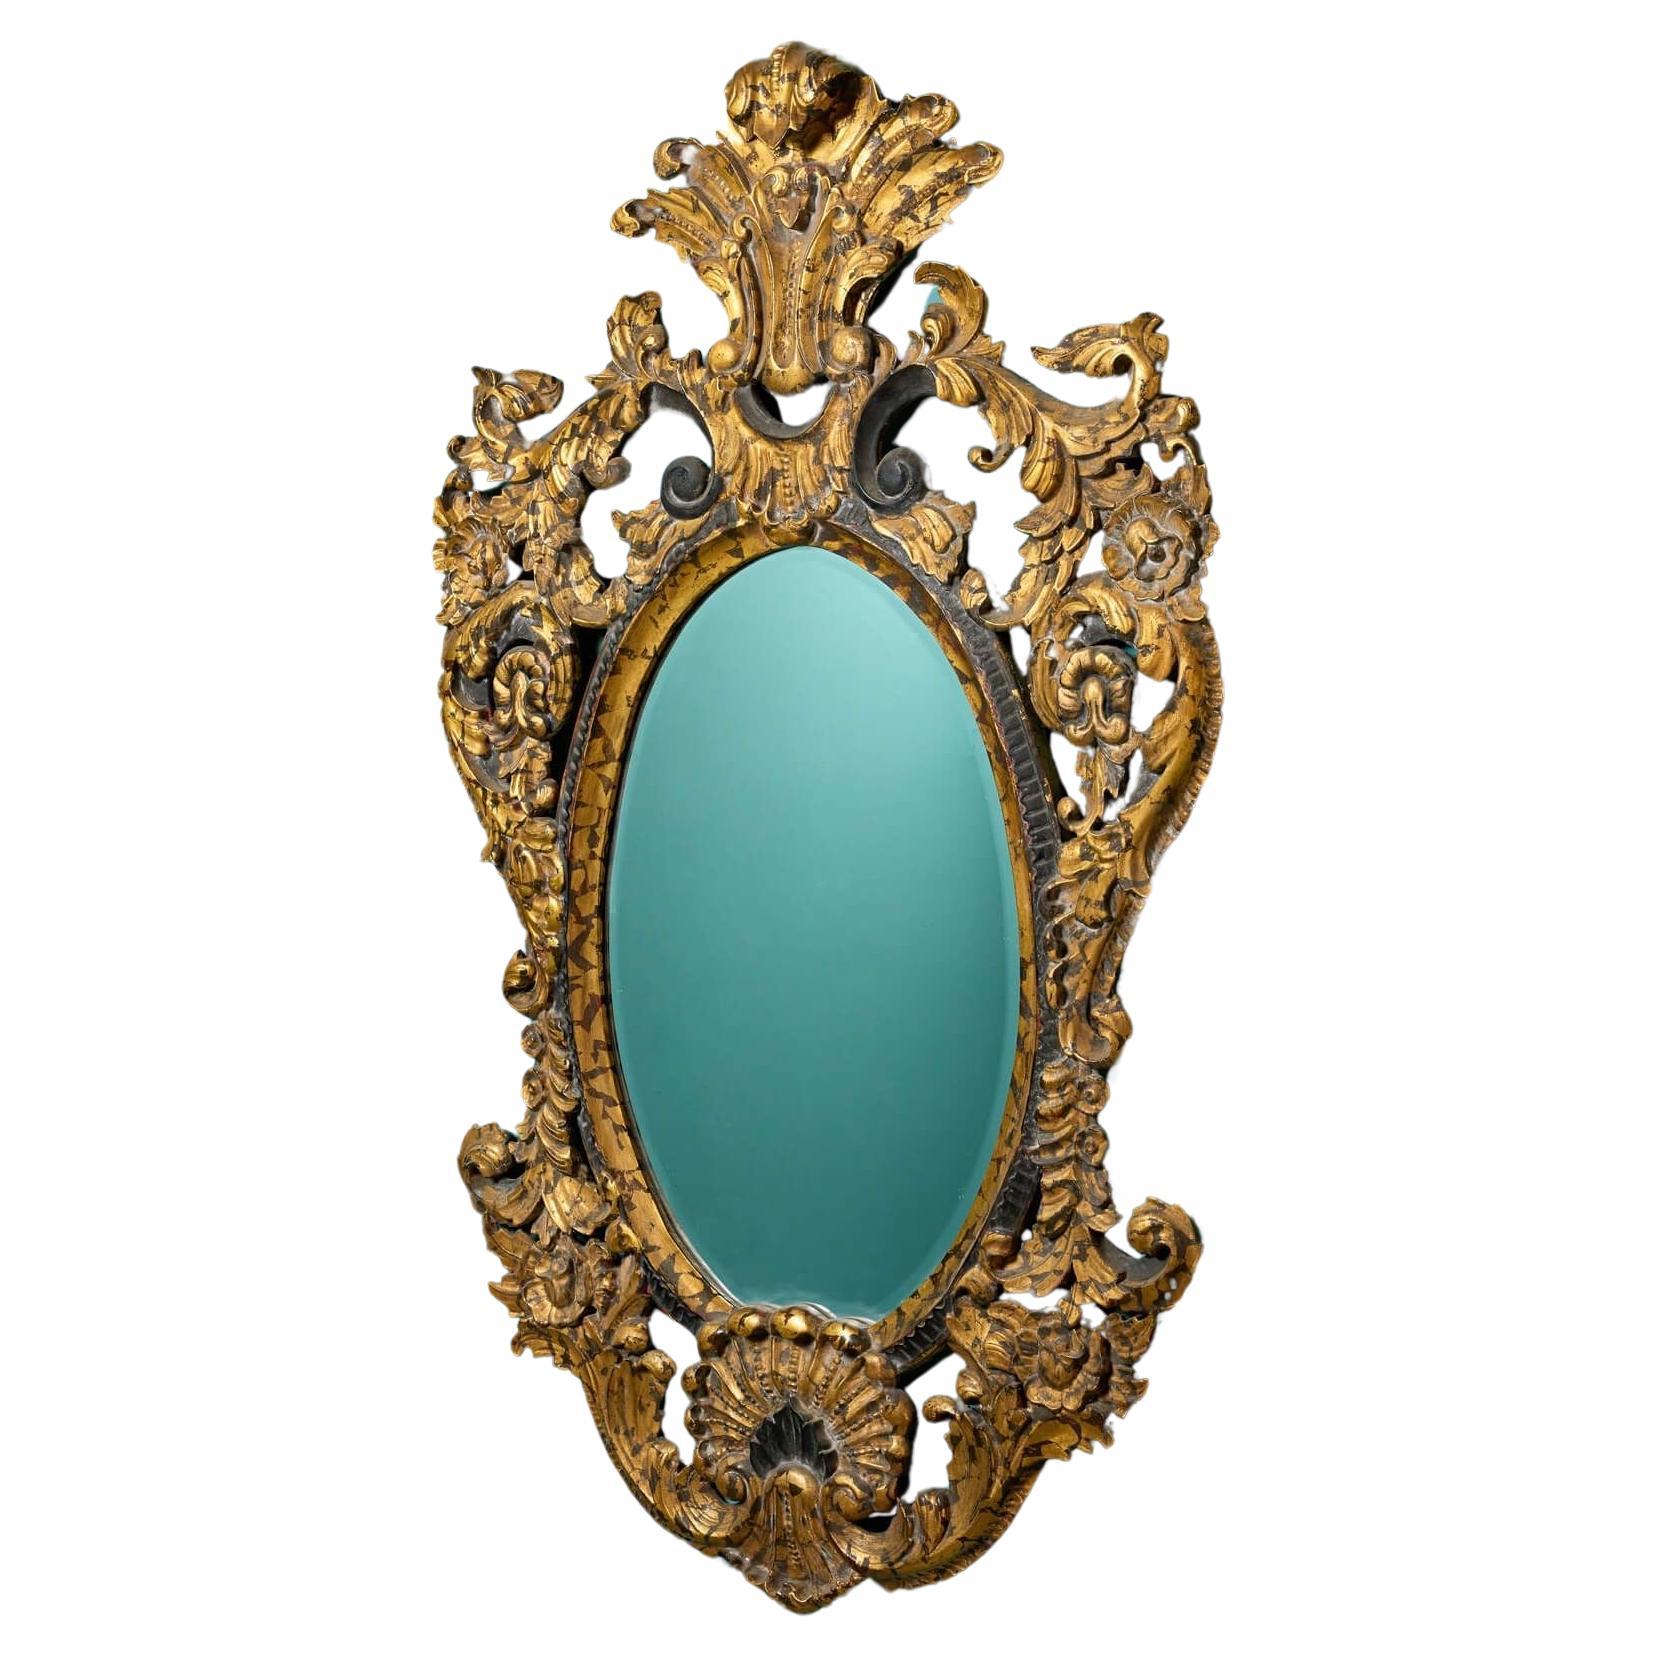 A large and elaborate French rococo style parcel gilt oval wall mirror circa 1900. This striking mirror is an eye-catching feature for an interior wall, extravagantly carved in walnut with scrolling foliage, acanthus crest and parcel gilded in a